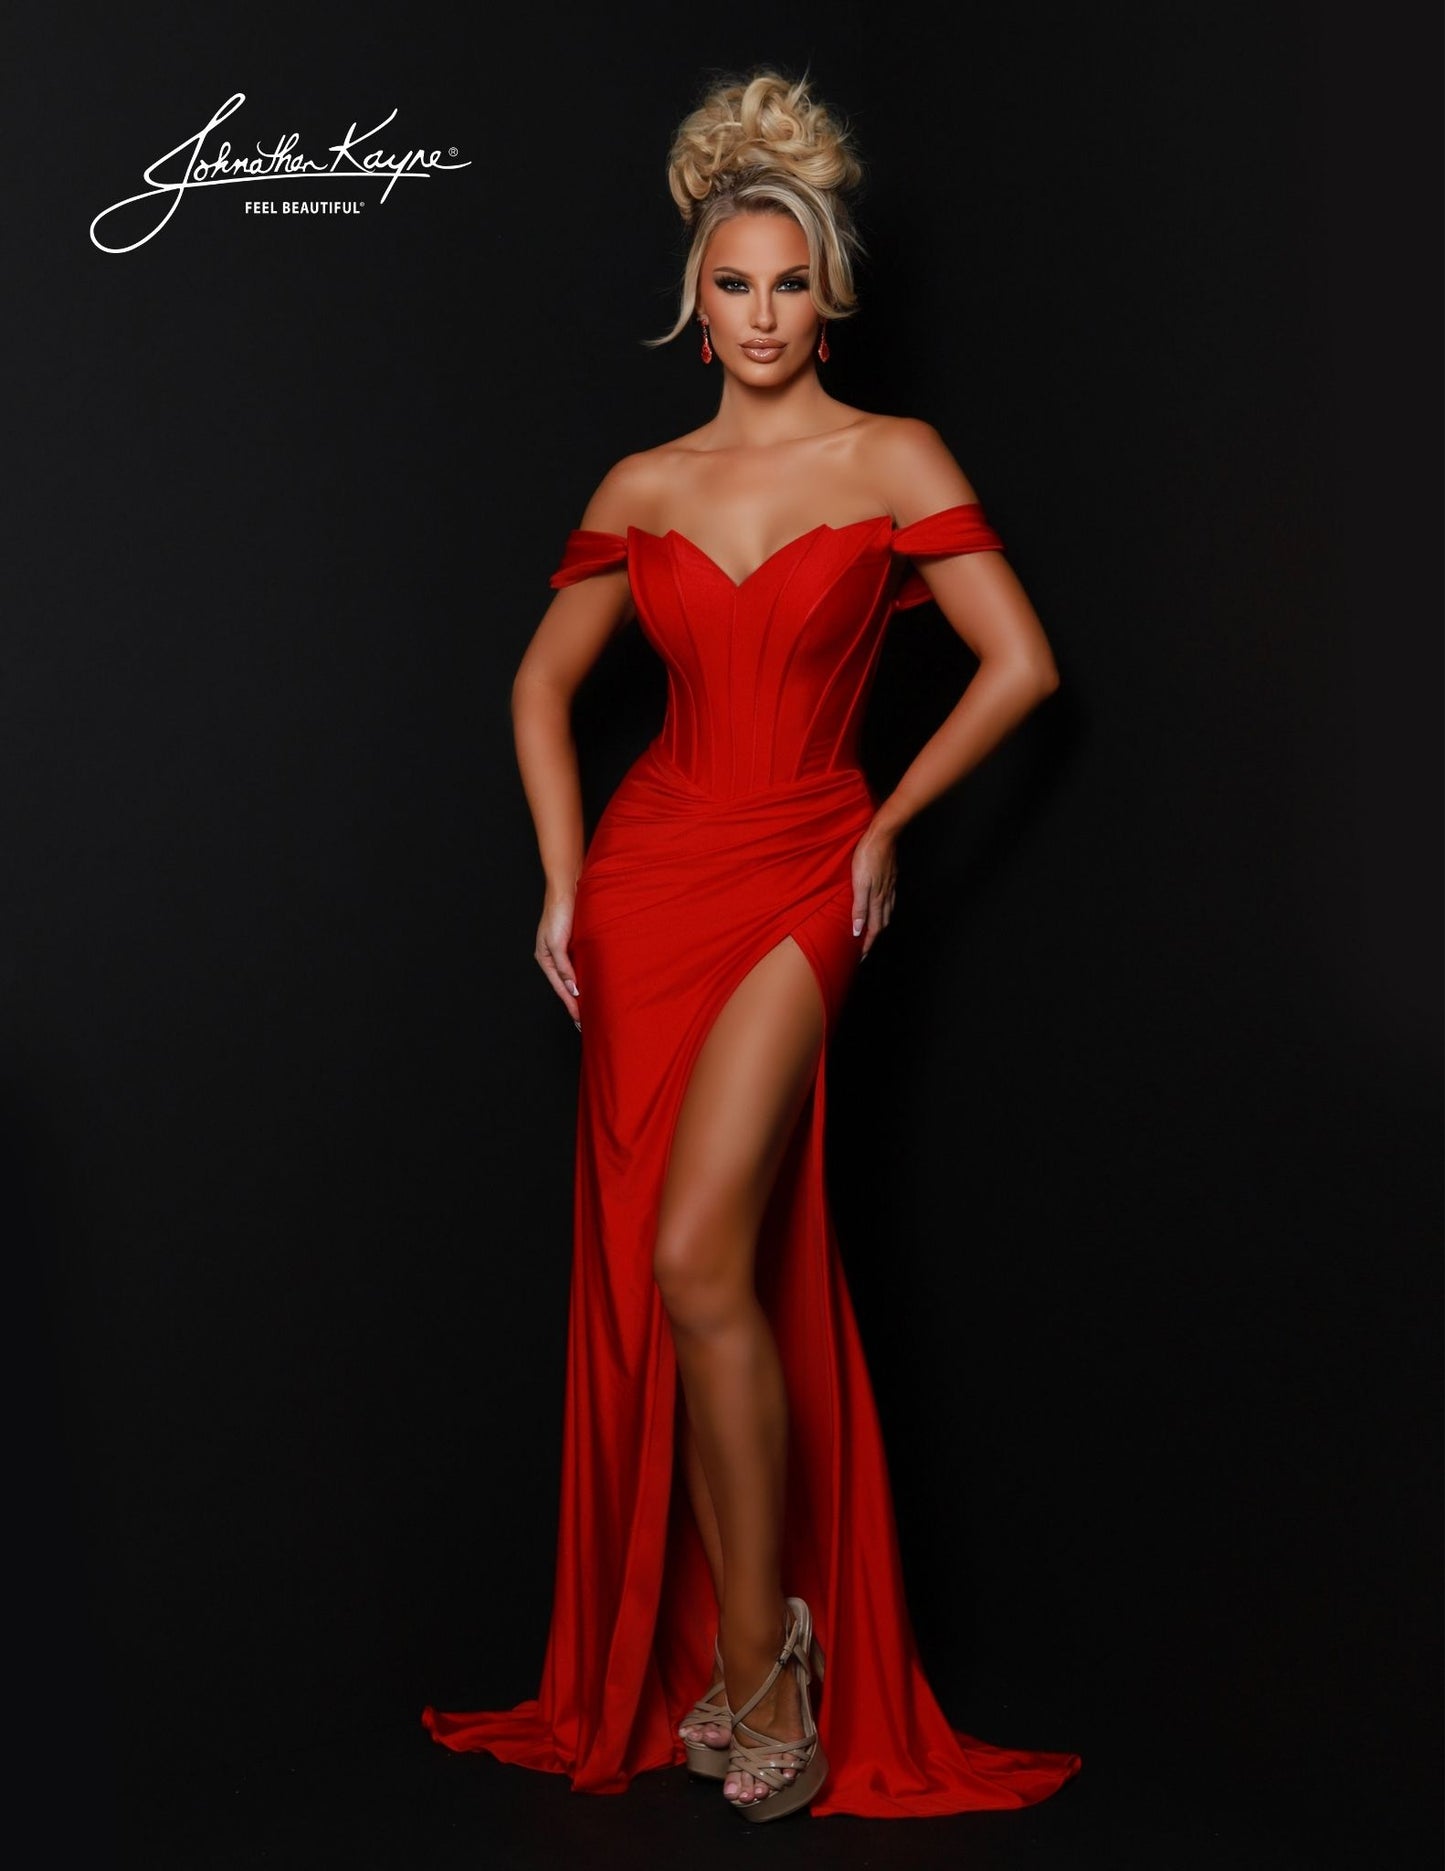 Introducing the Johnathan Kayne 2823 Prom Dress - an elegant, full-length evening gown designed to make a statement. The off-shoulder neckline, boning, and high slit V-neck the luxurious fabric and detailing provide an eye-catching finish. Perfect for any formal occasion, this stunning dress will leave you feeling confident and unforgettable. A timeless beauty! 